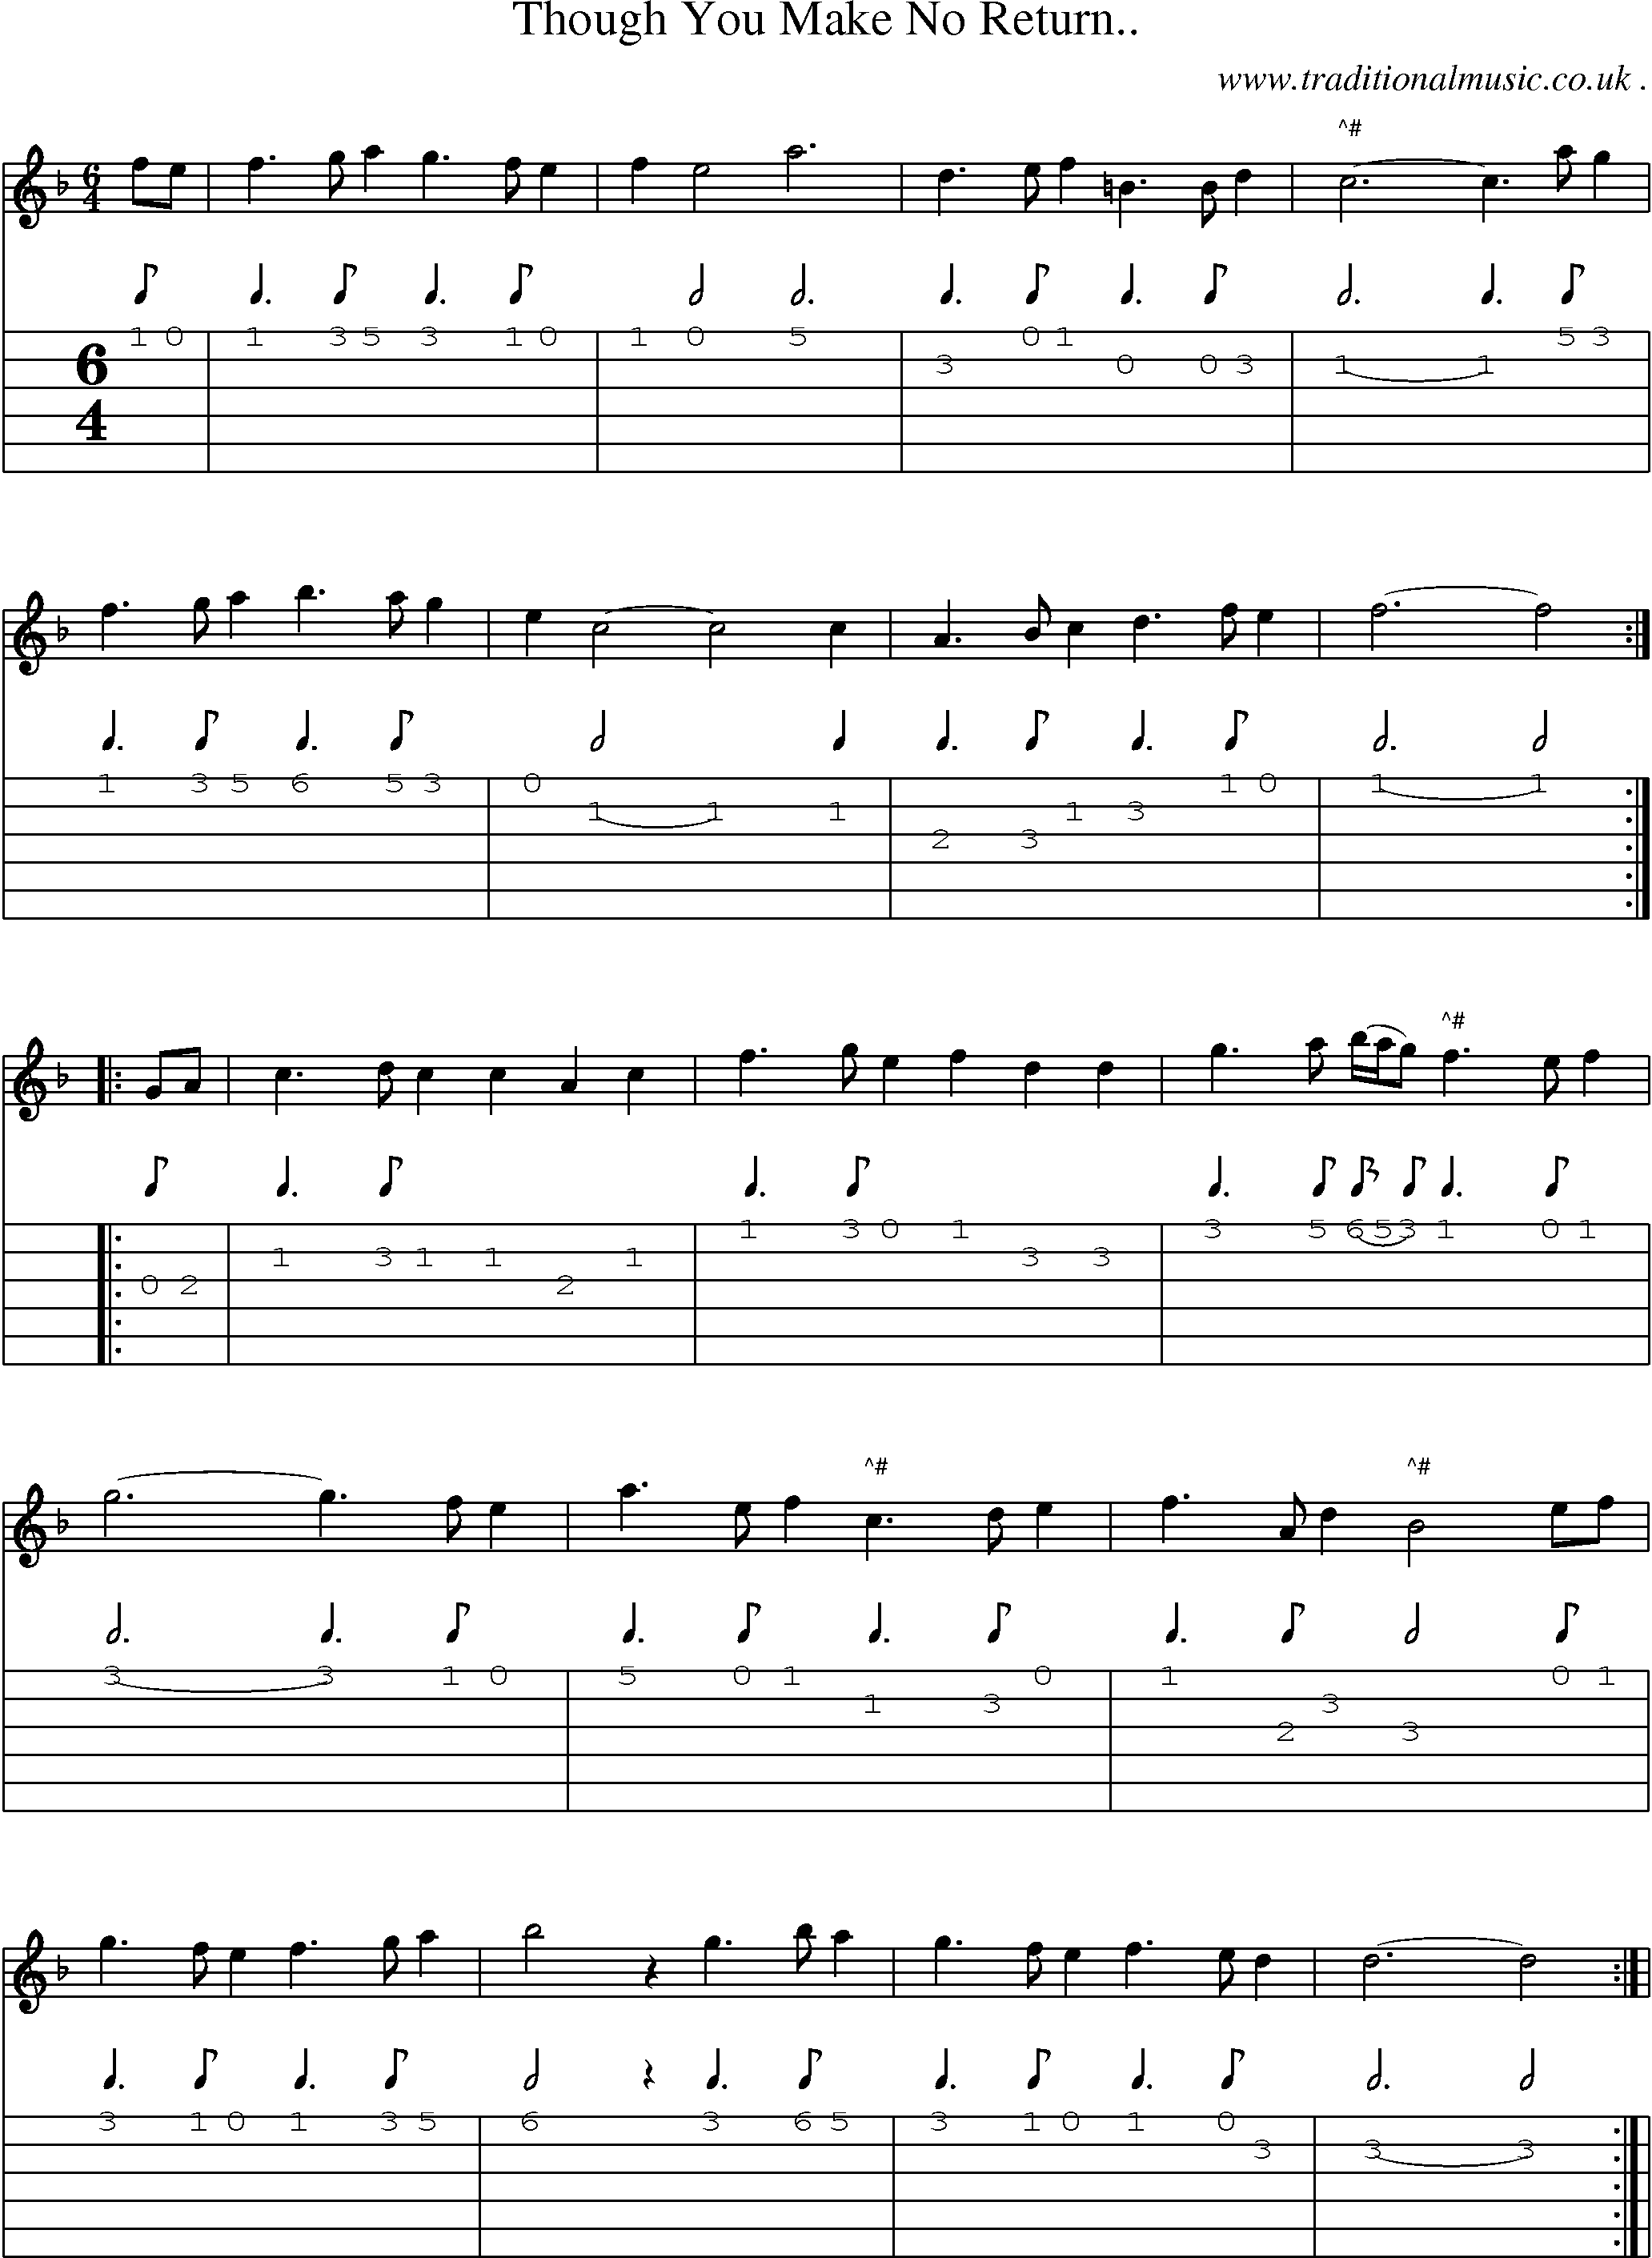 Sheet-Music and Guitar Tabs for Though You Make No Return